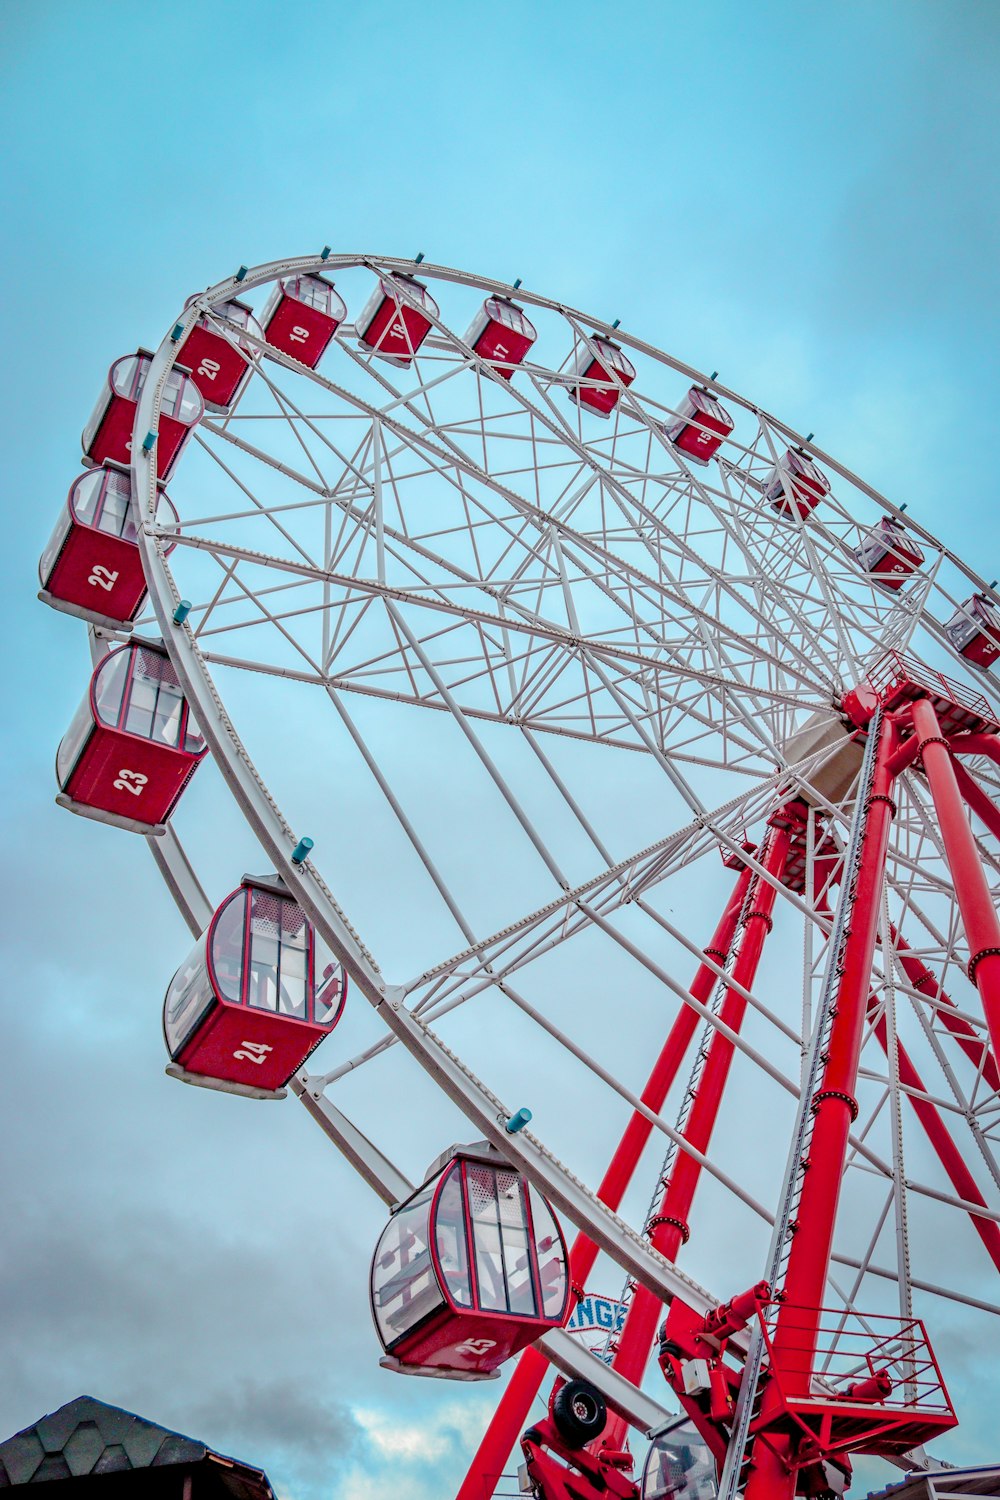 a ferris wheel with red seats on a cloudy day